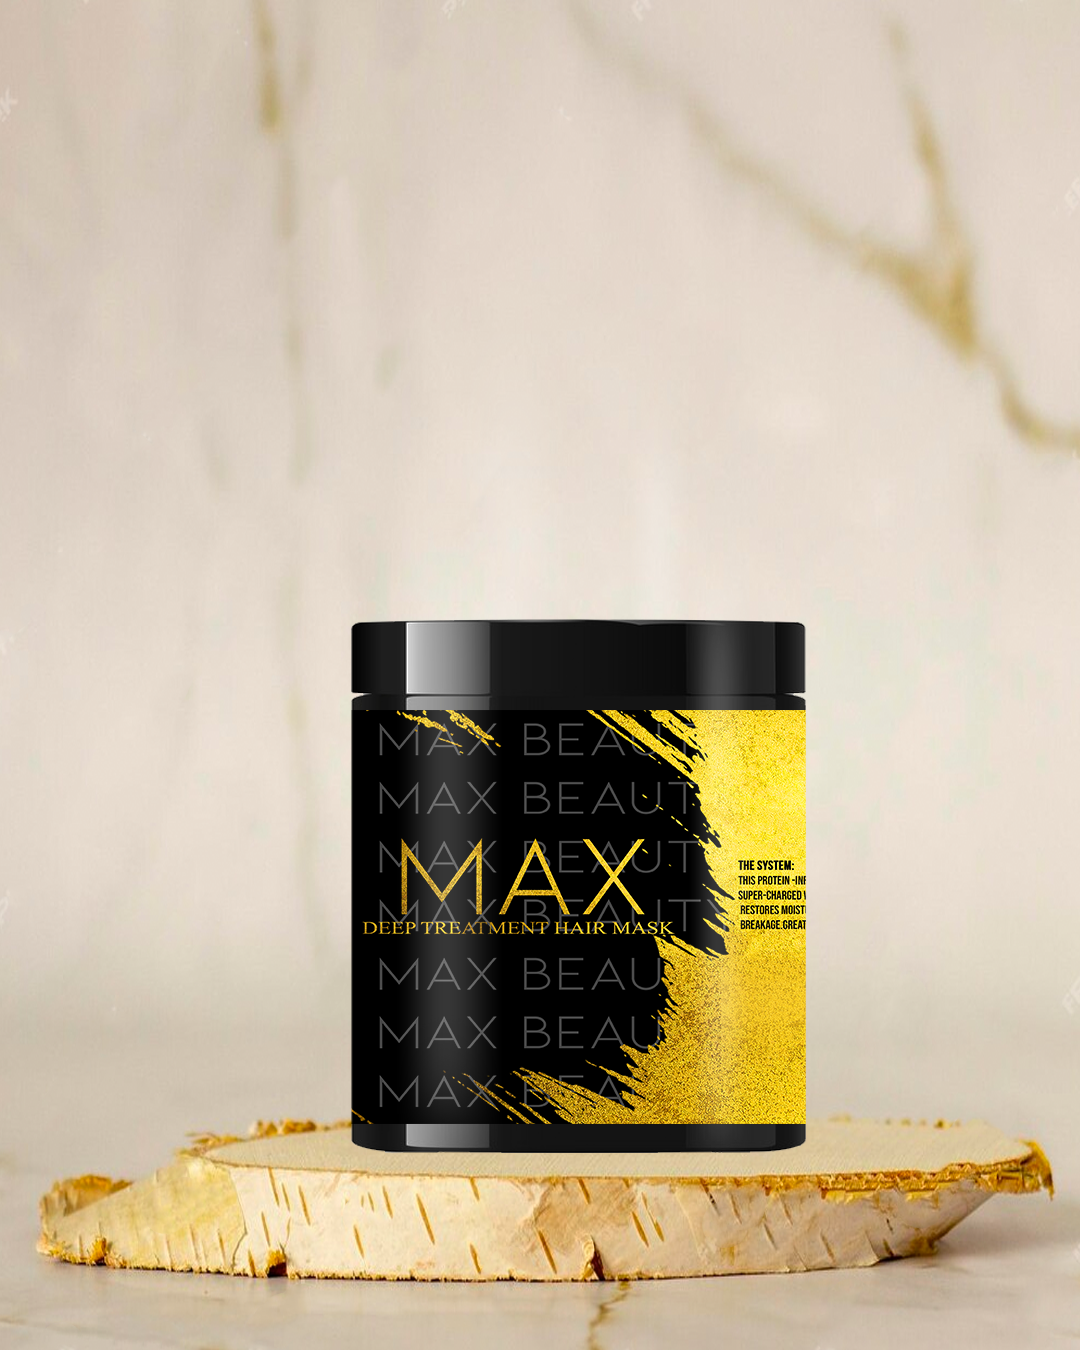 Max Beauty Protein Treatment